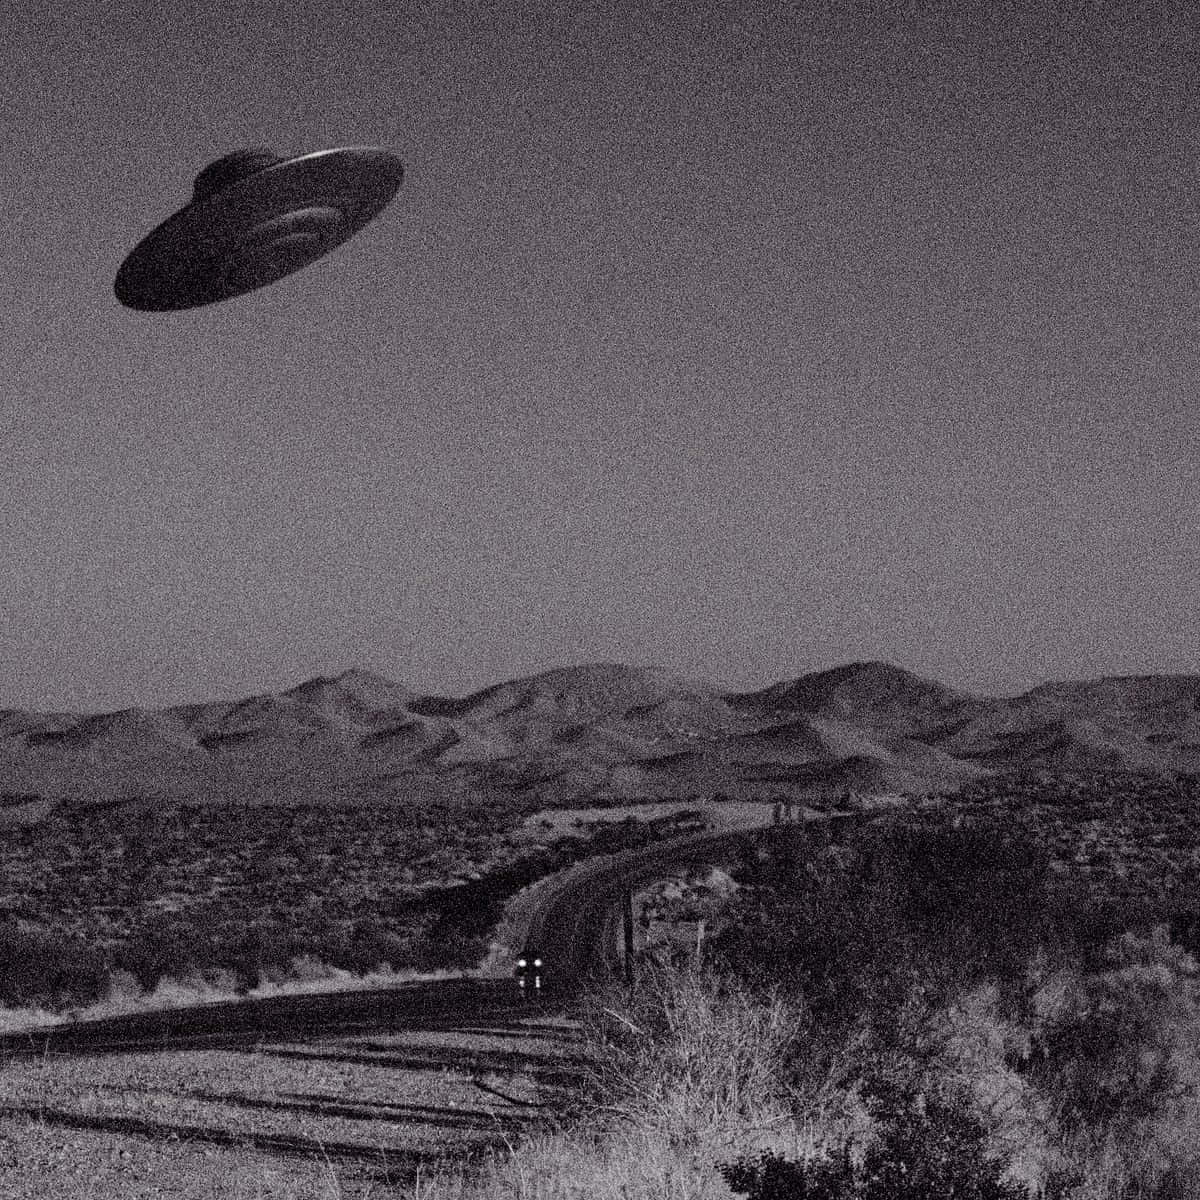 A Black And White Photo Of A Flying Saucer